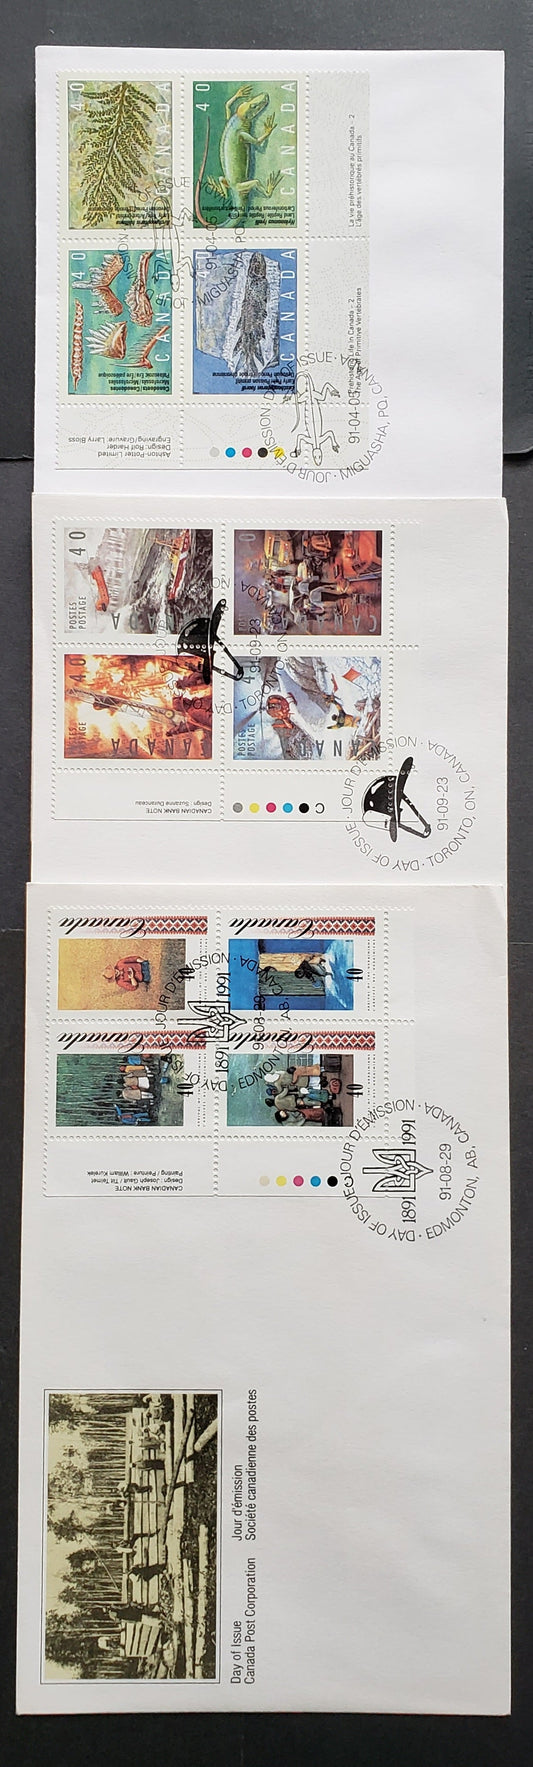 Lot 96 Canada #1309a, 1329a, 1333a 40c Multicolor 1991 Prehistoric Life - Dangerous Occupations Issues, 3 Canada Post FDC's Franked With LL Inscription Blocks, Approx 22,000 Of Each Produced, Est. Value $11.1